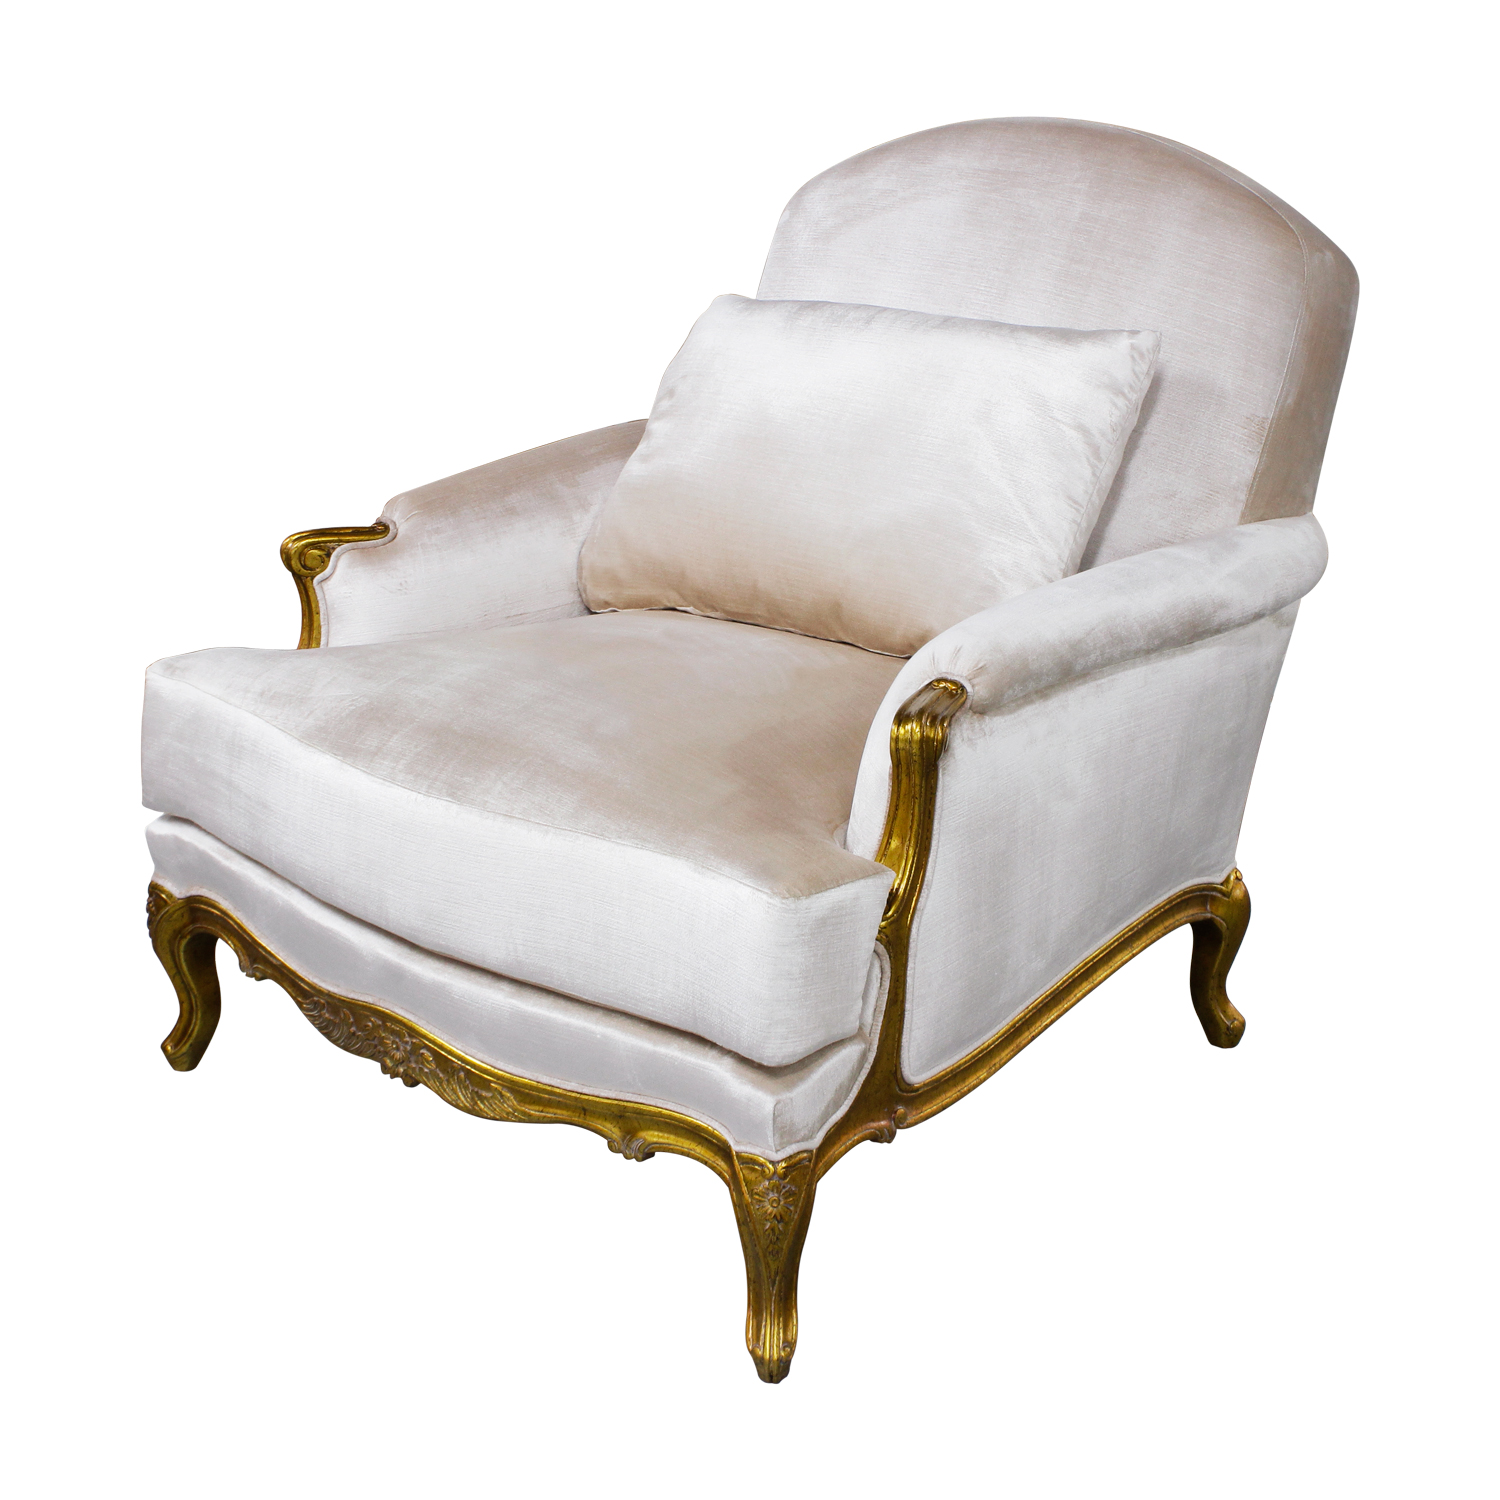 French Louis Xv Style Arm Chair Nf9 Jansen Furniture